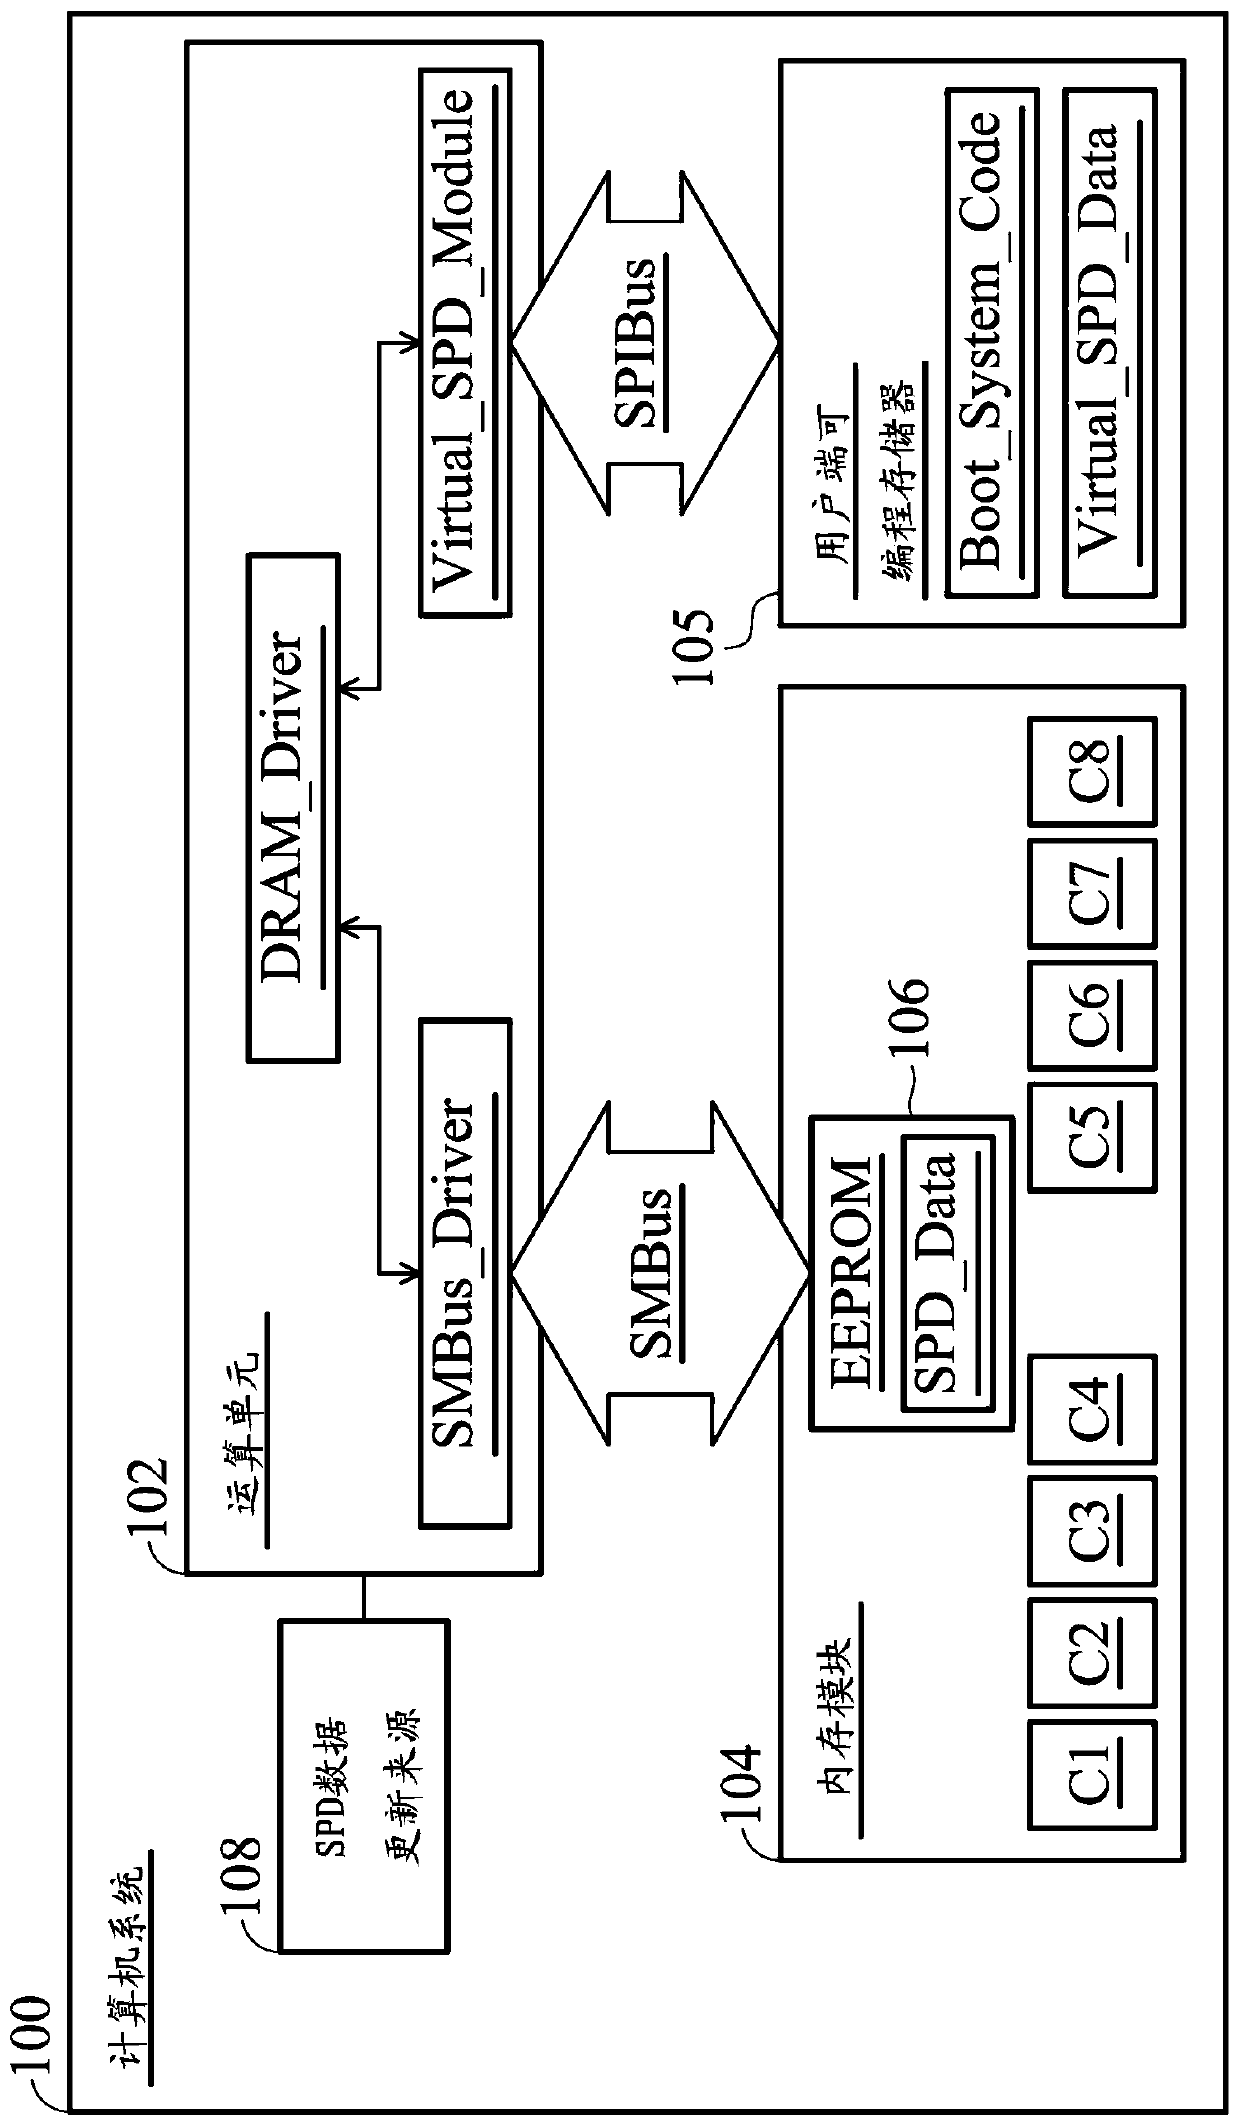 Computer system with serial presence detection data and memory module control method